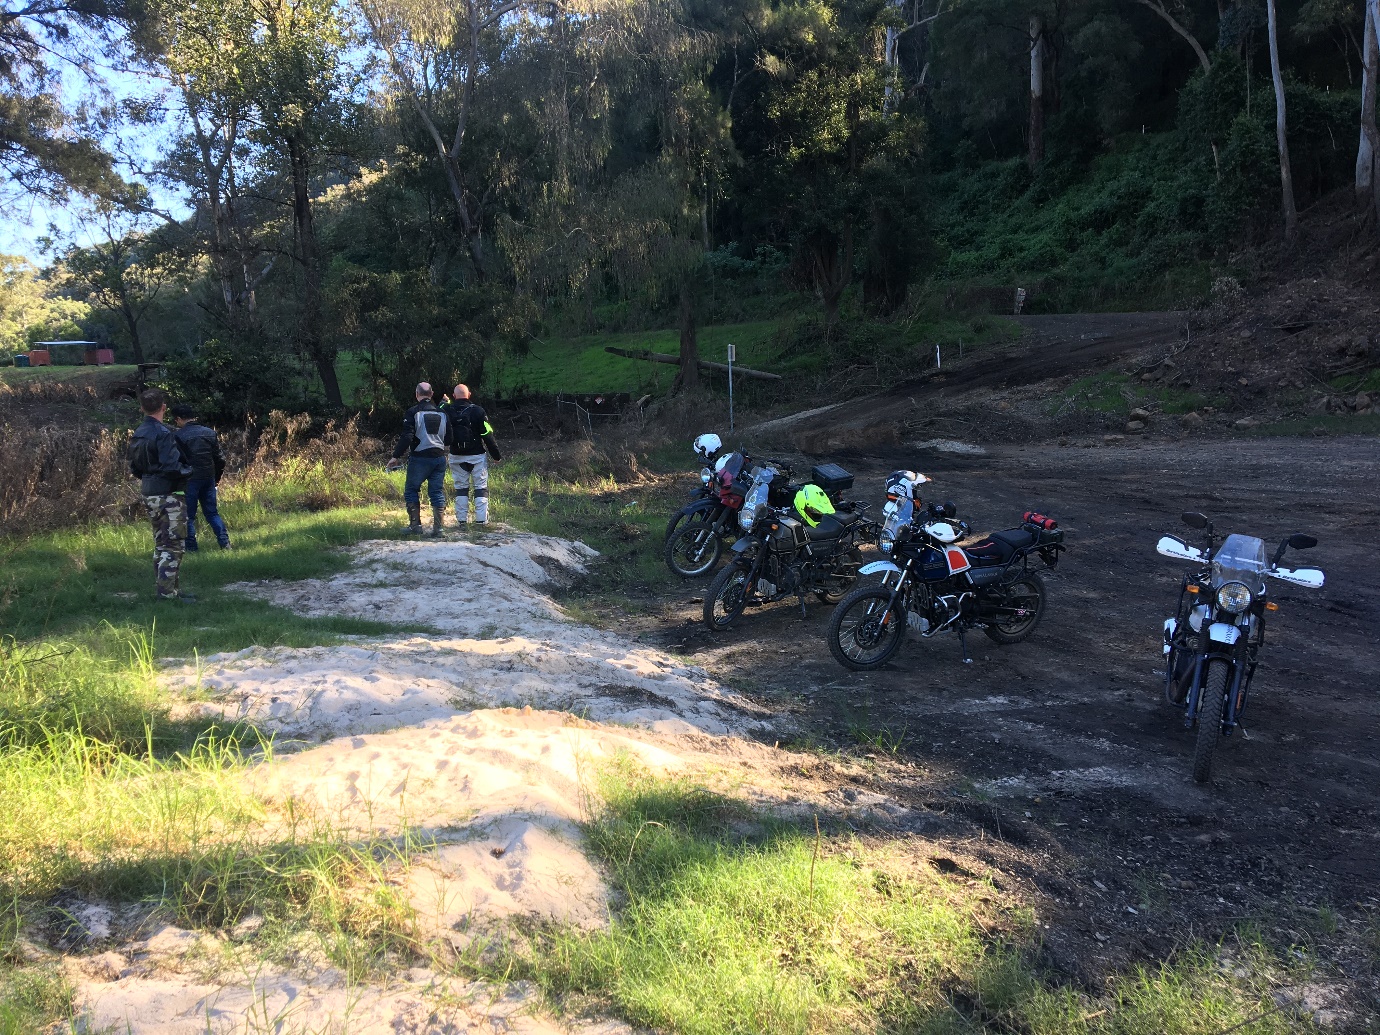 A group of people standing next to motorcycles on a dirt road

Description automatically generated with medium confidence